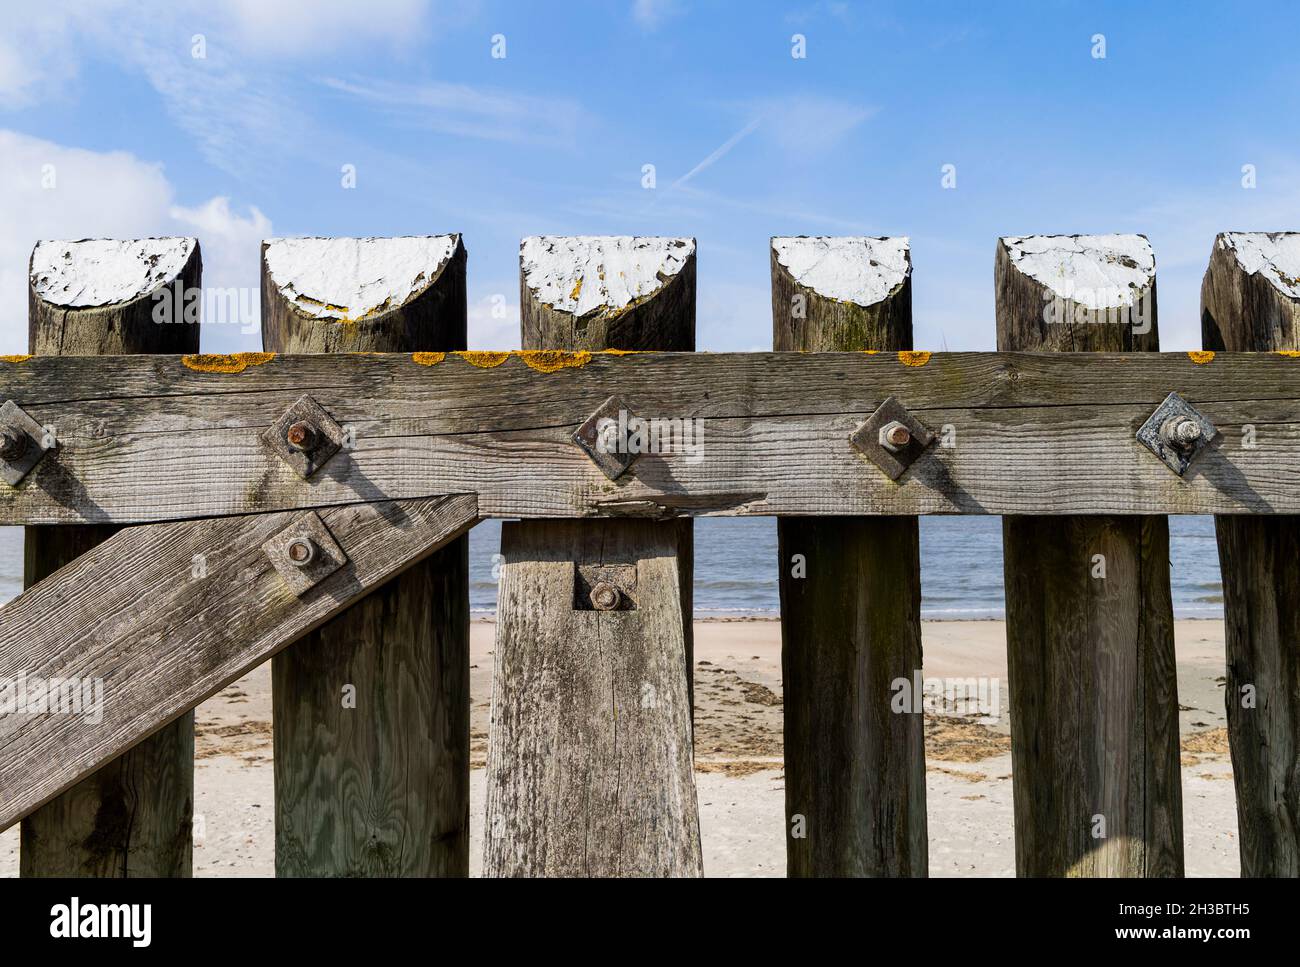 The photo shows a massive wooden fence on the island of Baltrum Stock Photo